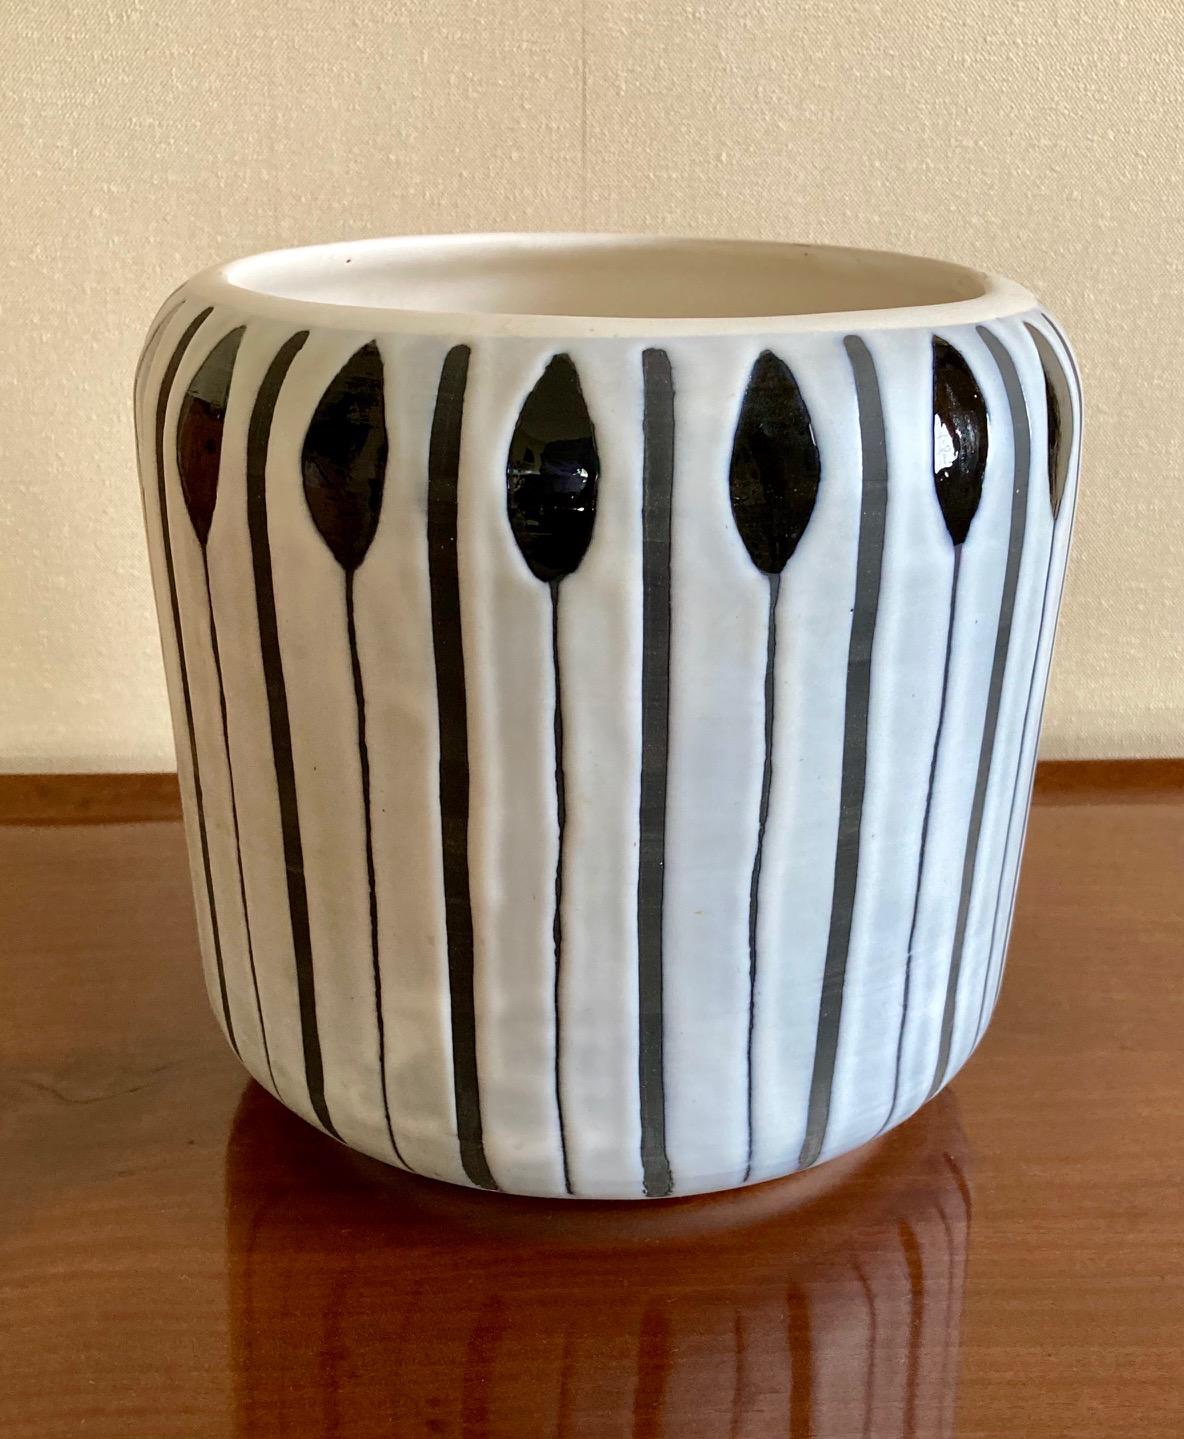 A large cylindrical vase, cachepot or wine cooler,
White glazed ceramic with blue and black decoration.
Stamped underneath: Capron Vallauris France
Vallauris, France, circa 1960.

Measures : 
Height 21.5 cm (8.5 in.)
Diameter 22.5 cm (8.9